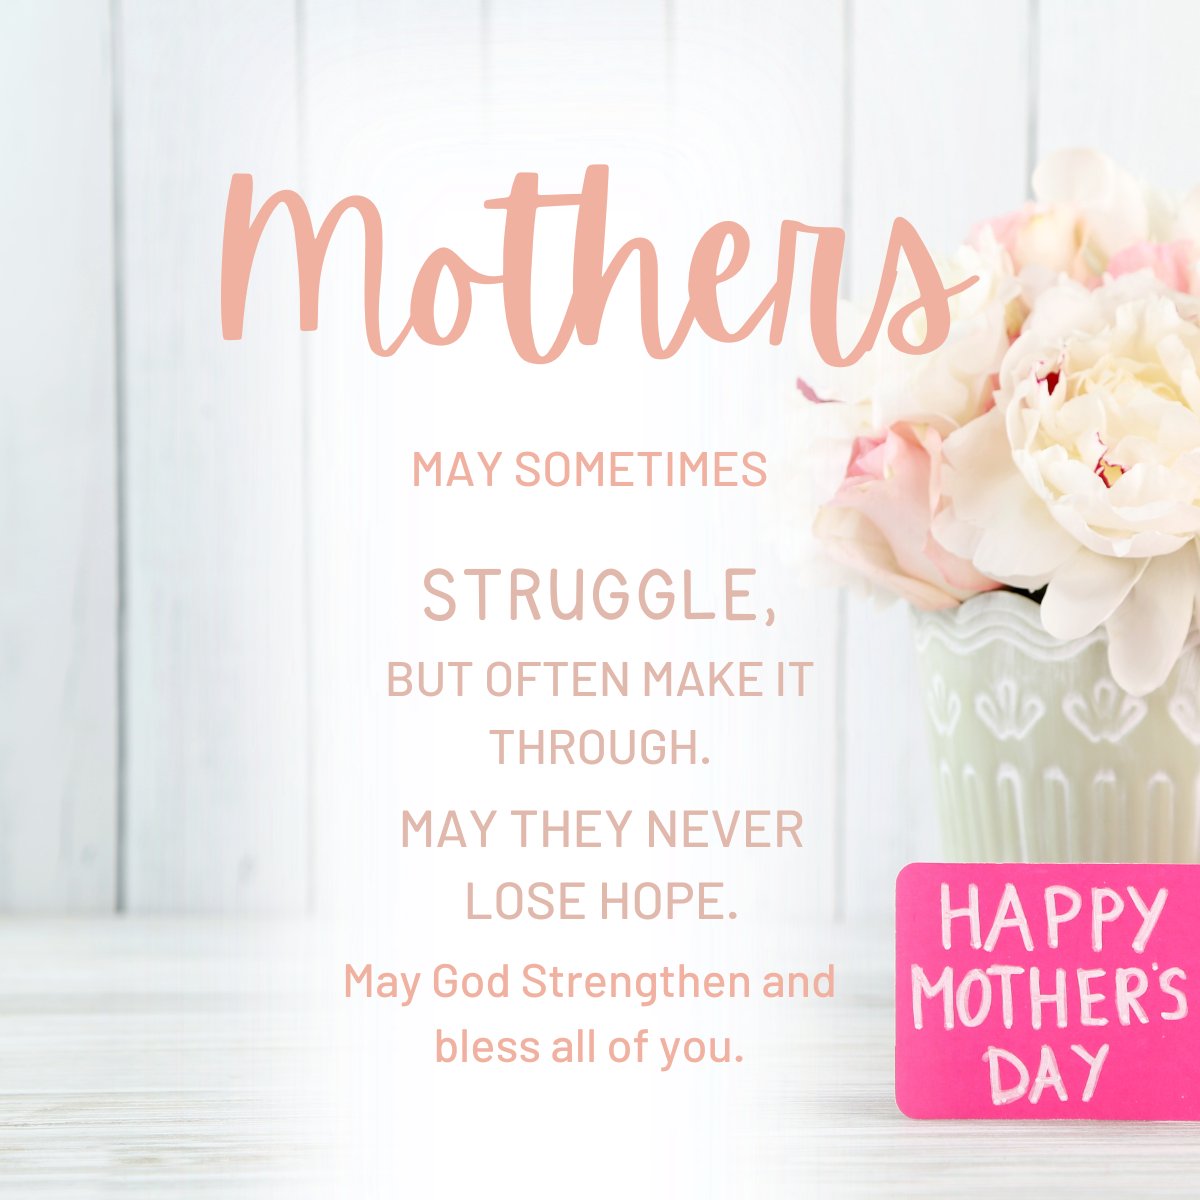 Extending heartfelt wishes to all the fantastic mothers on Mother's Day!

Many daughters have done virtuously, but thou excellest them all.
Proverbs 31:29

#HappyMothersDay #BibleVerse #BlessedDay